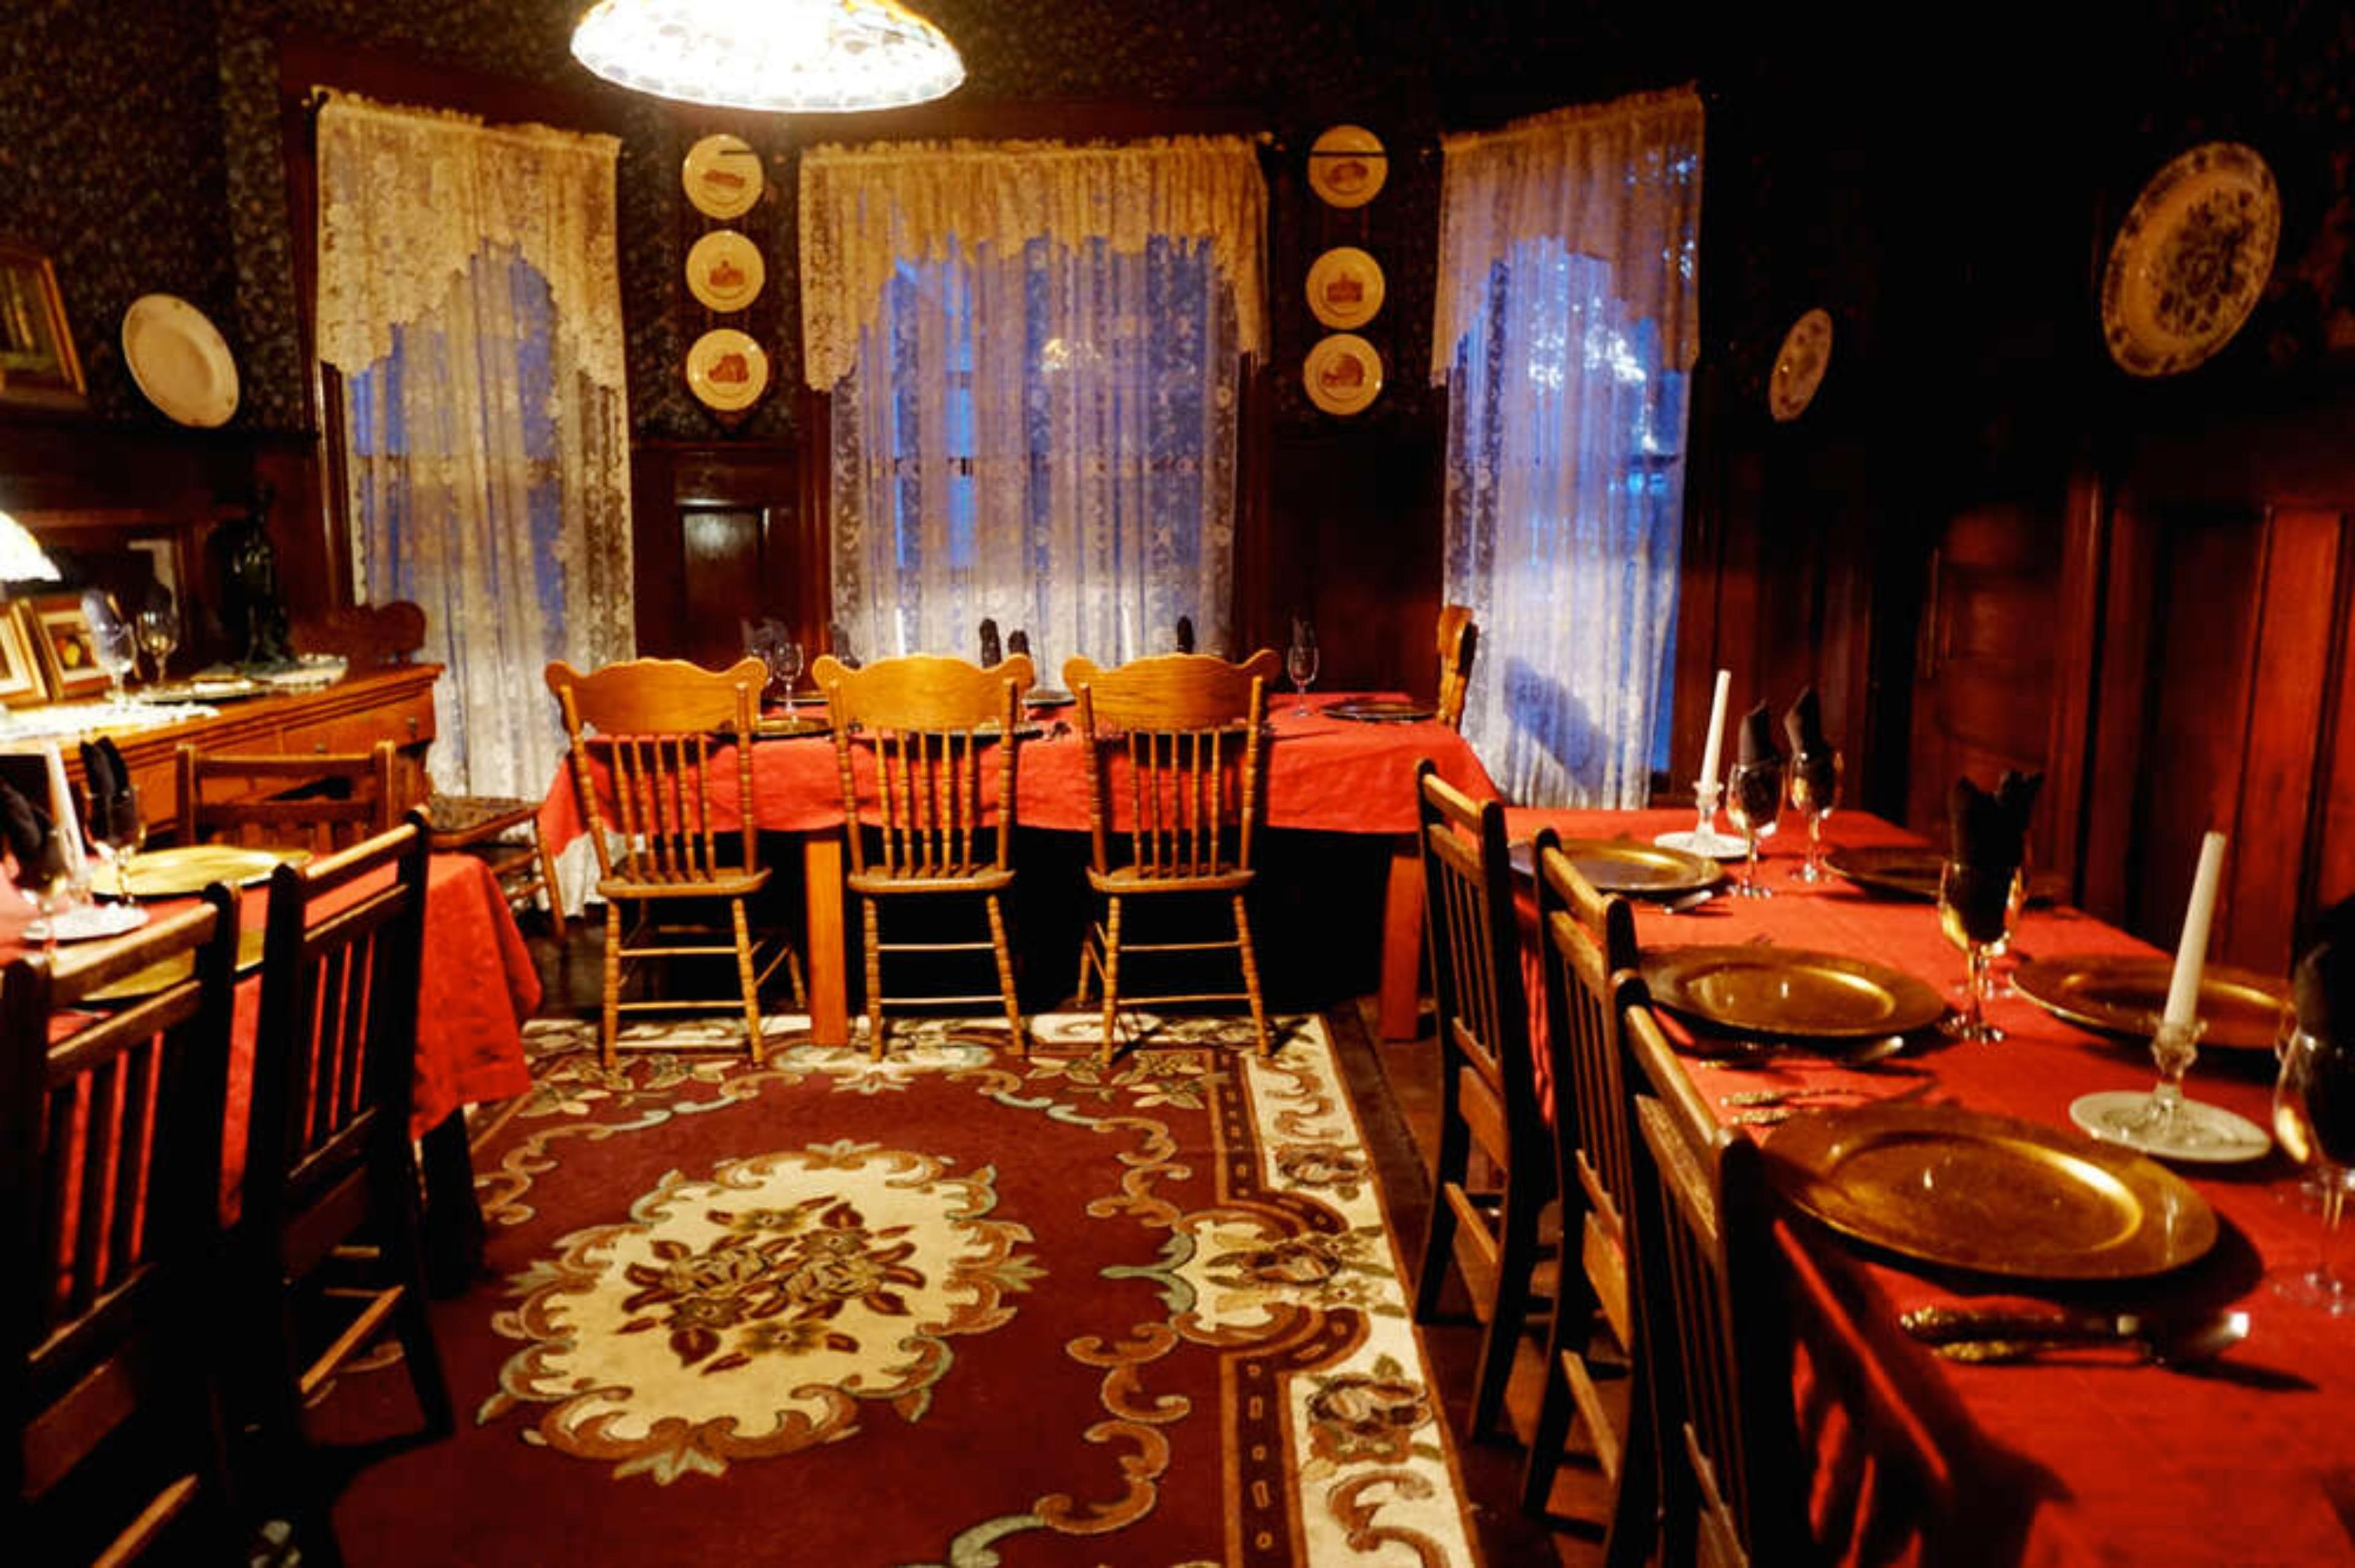 The Mystery Mansion Dinner Theater